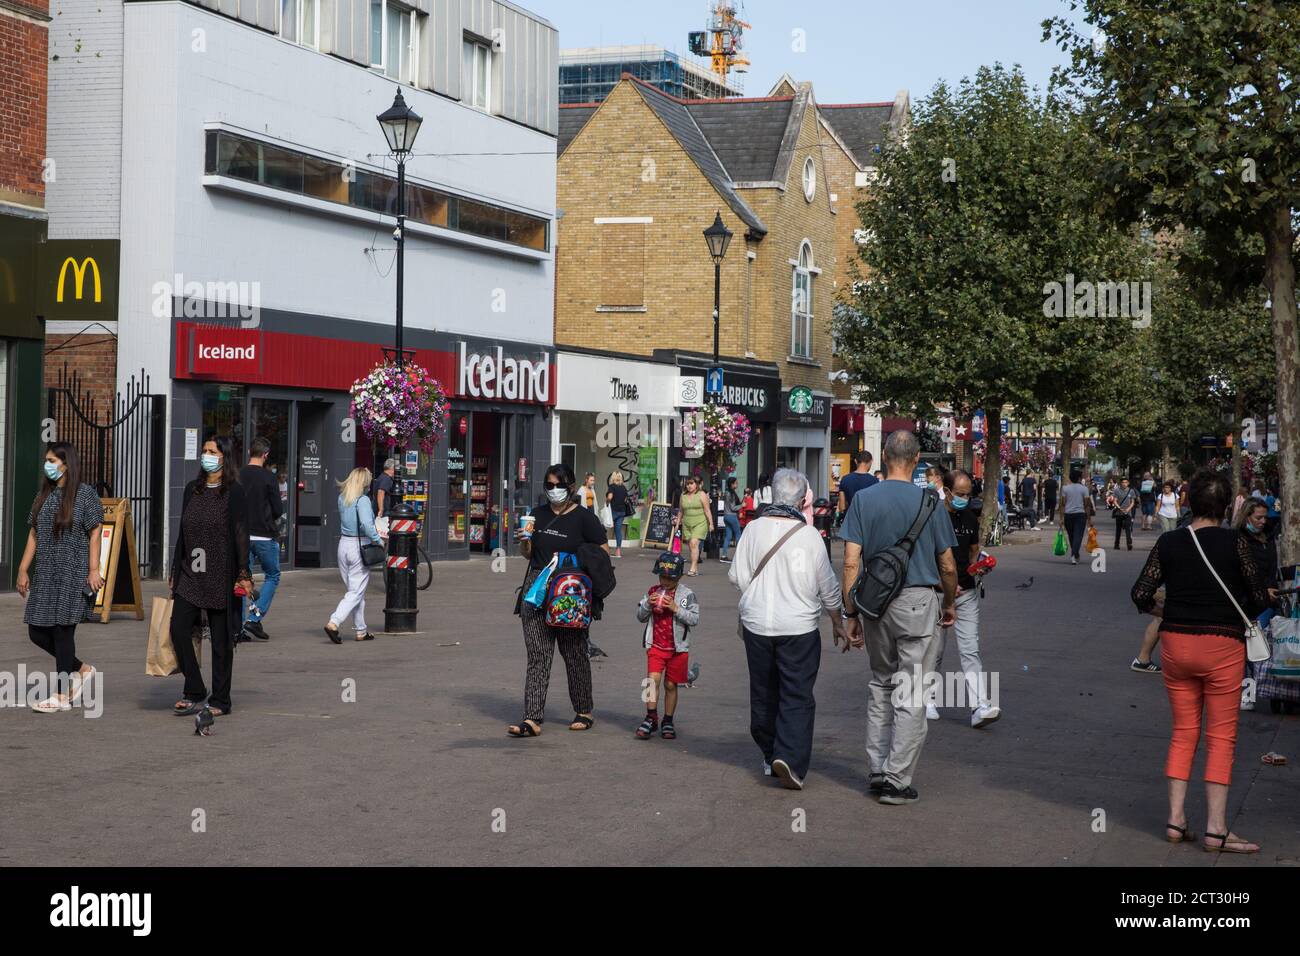 Staines-upon-Thames, UK. 20th September, 2020.Local residents, some of whom wearing face coverings, do some Sunday shopping in the town centre. The Borough of Spelthorne, of which Staines-upon-Thames forms part along with Ashford, Sunbury-upon-Thames, Stanwell, Shepperton and Laleham, has been declared an Ôarea of concernÕ for COVID-19 by the government following a marked rise in coronavirus infections which is inconsistent with other areas of Surrey. Credit: Mark Kerrison/Alamy Live News Stock Photo